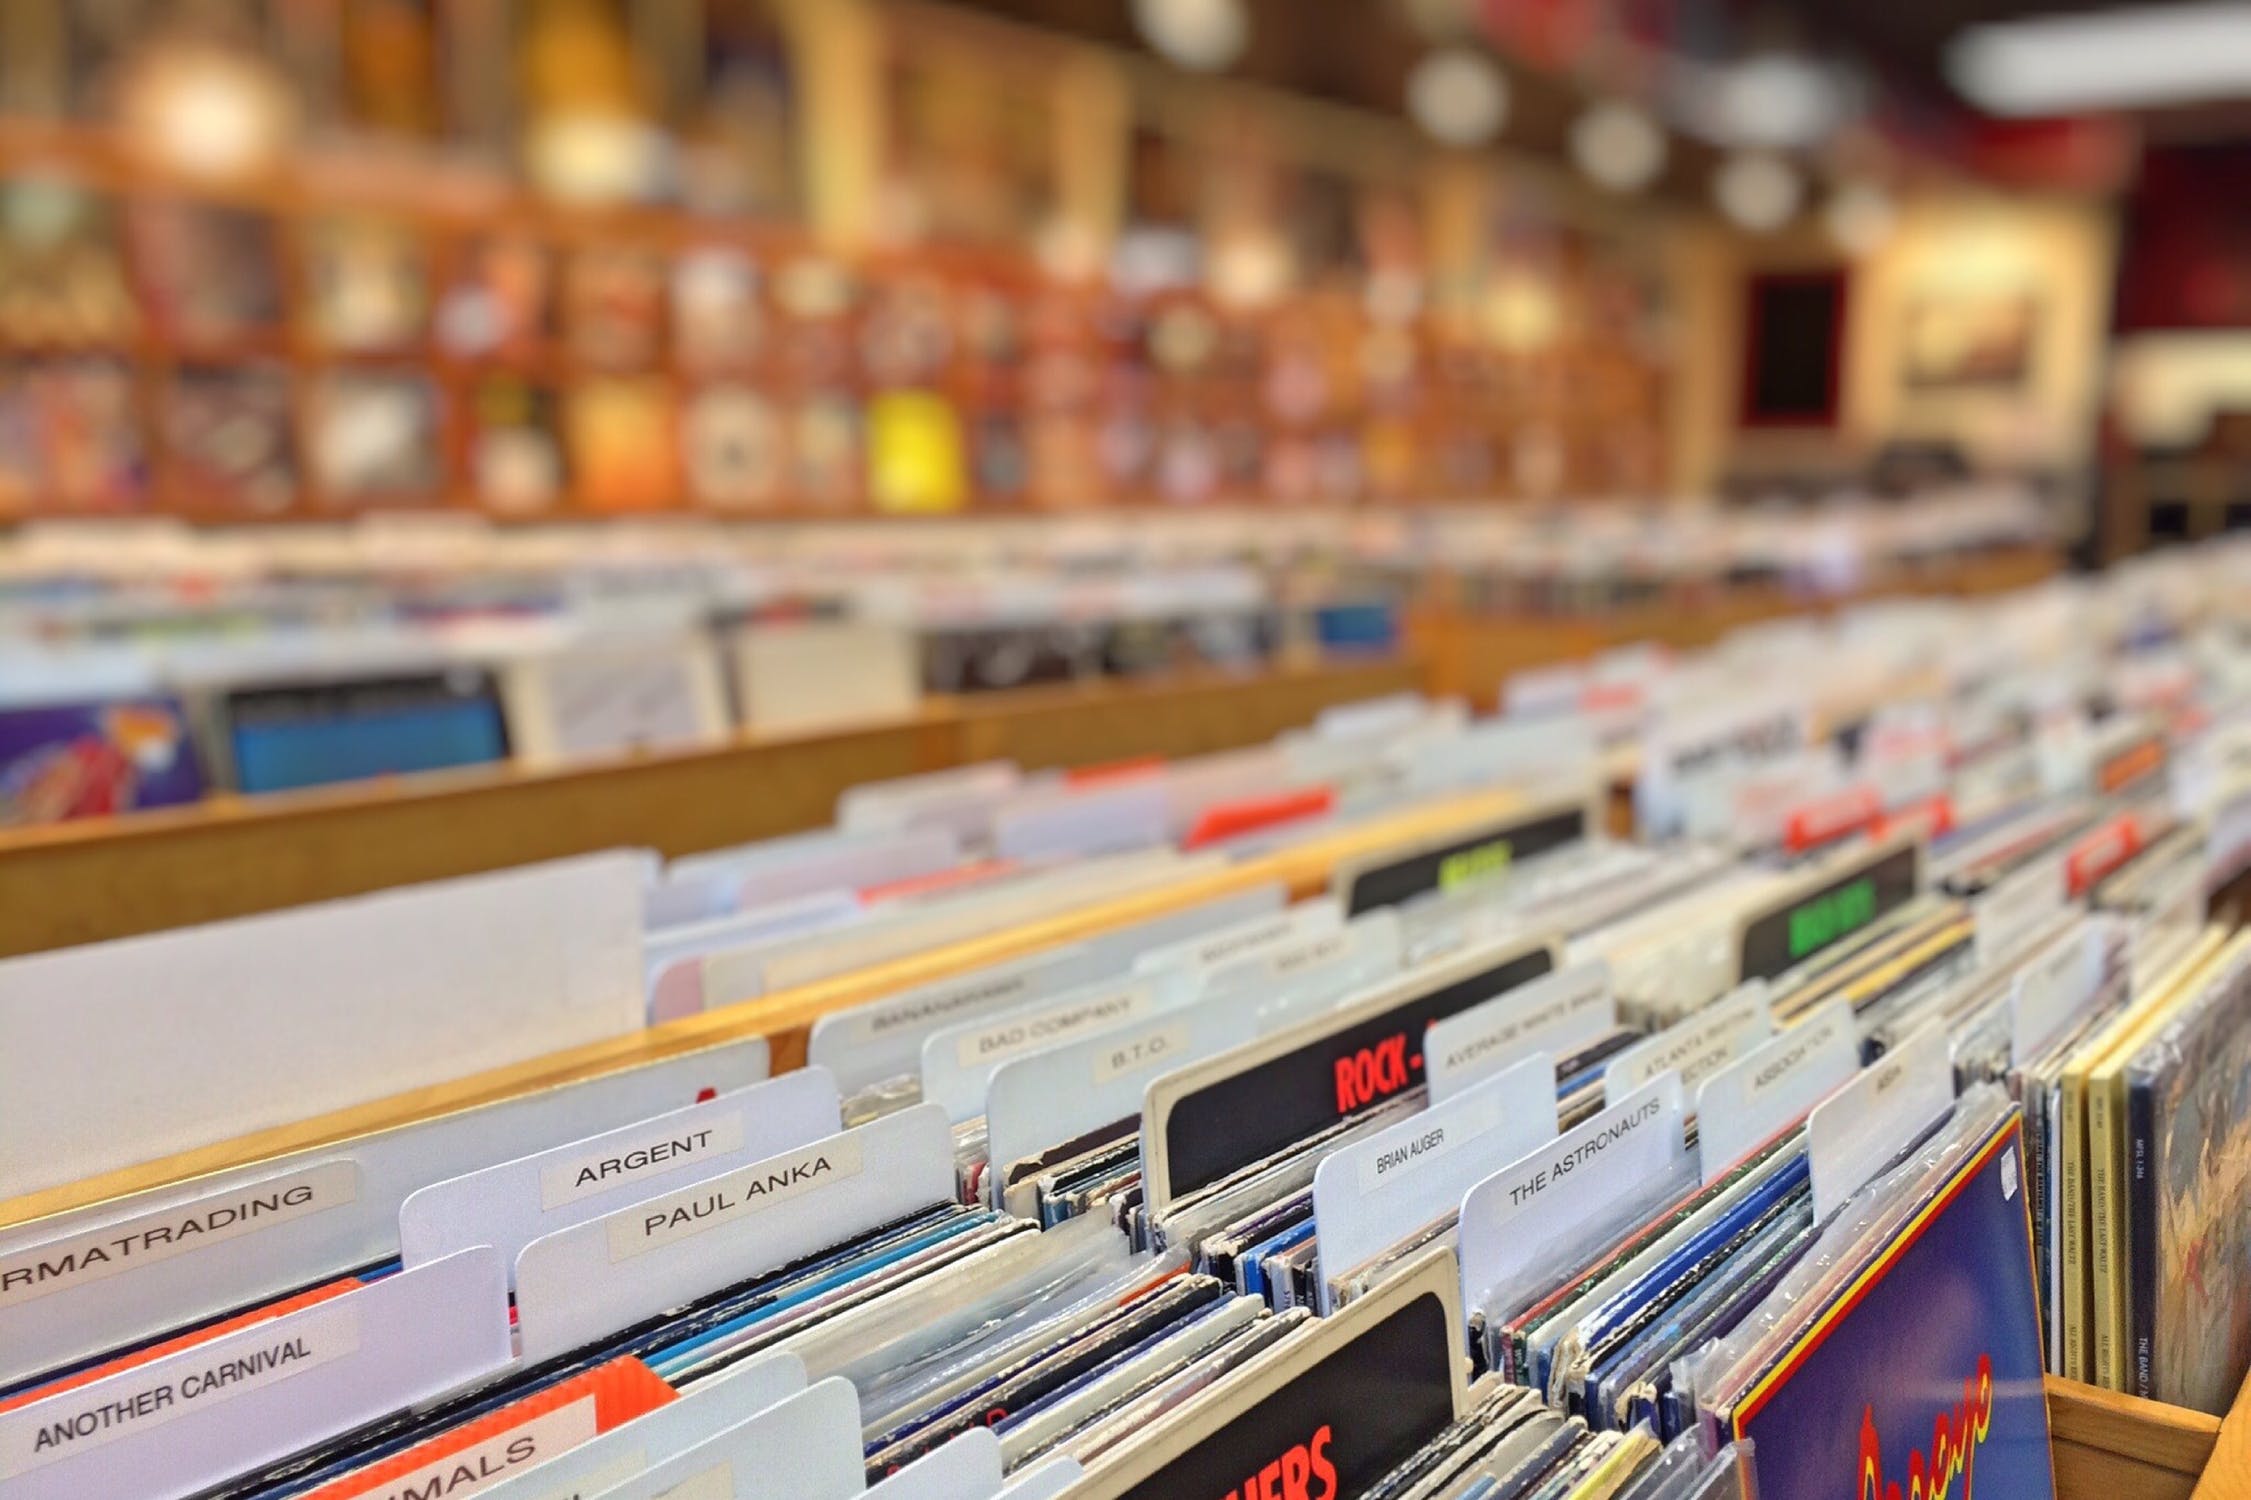 Australian record stores get lifeline from new RSD Drops initiative